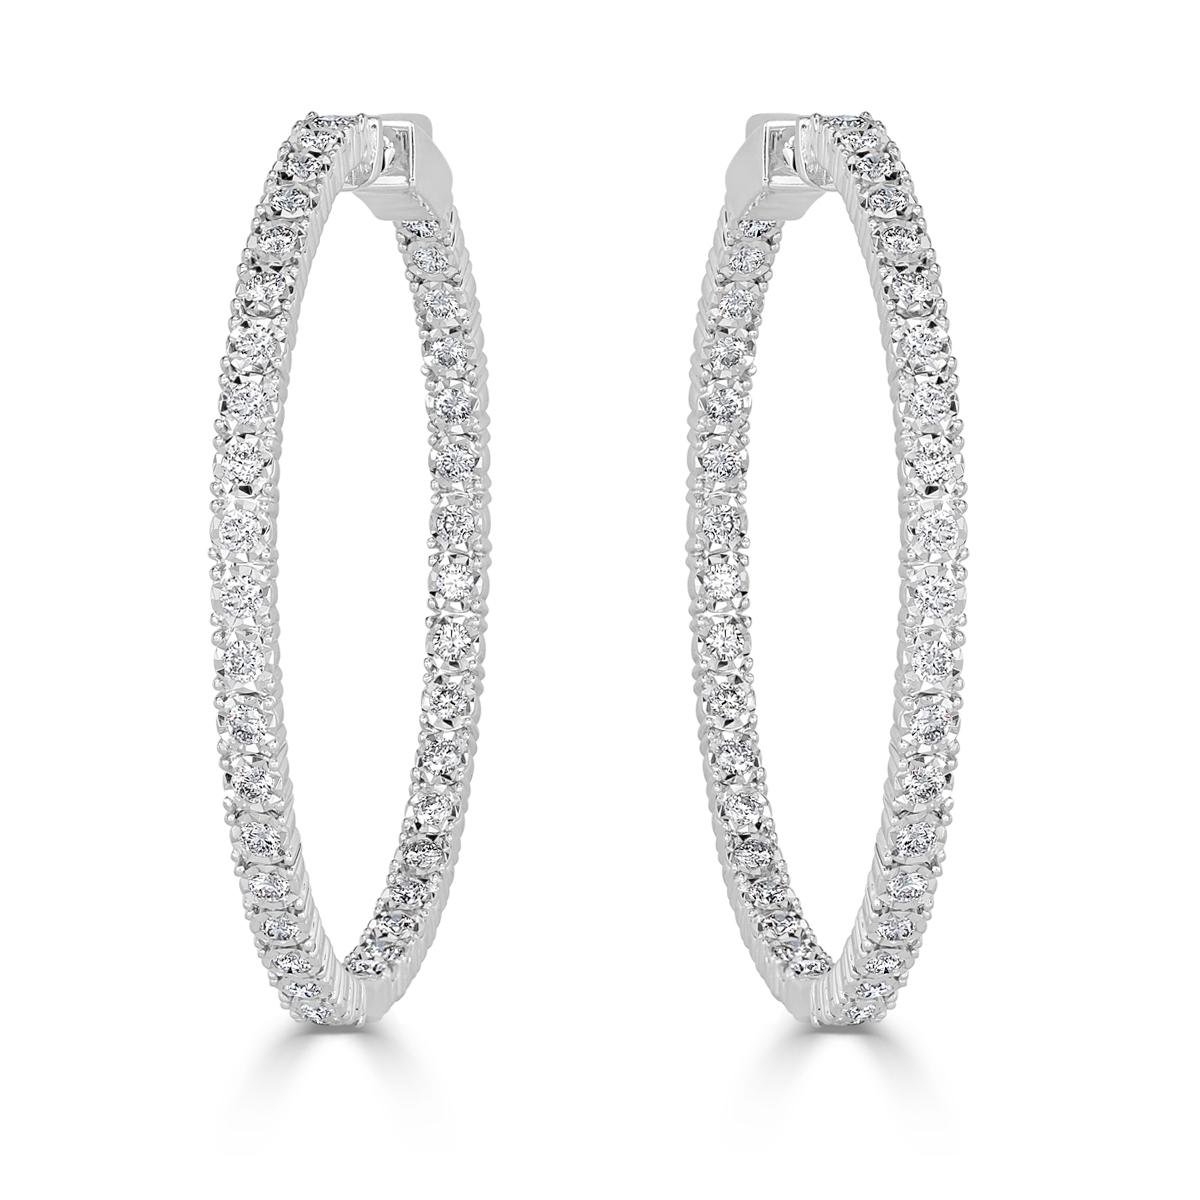 Custom created in 14k white gold, this gorgeous pair of round brilliant cut diamond hoop earrings showcases a total of 2.37ct of shimmering round brilliant cut diamonds set in a classic 4 prongs setting style. The diamonds are graded at E-F in color